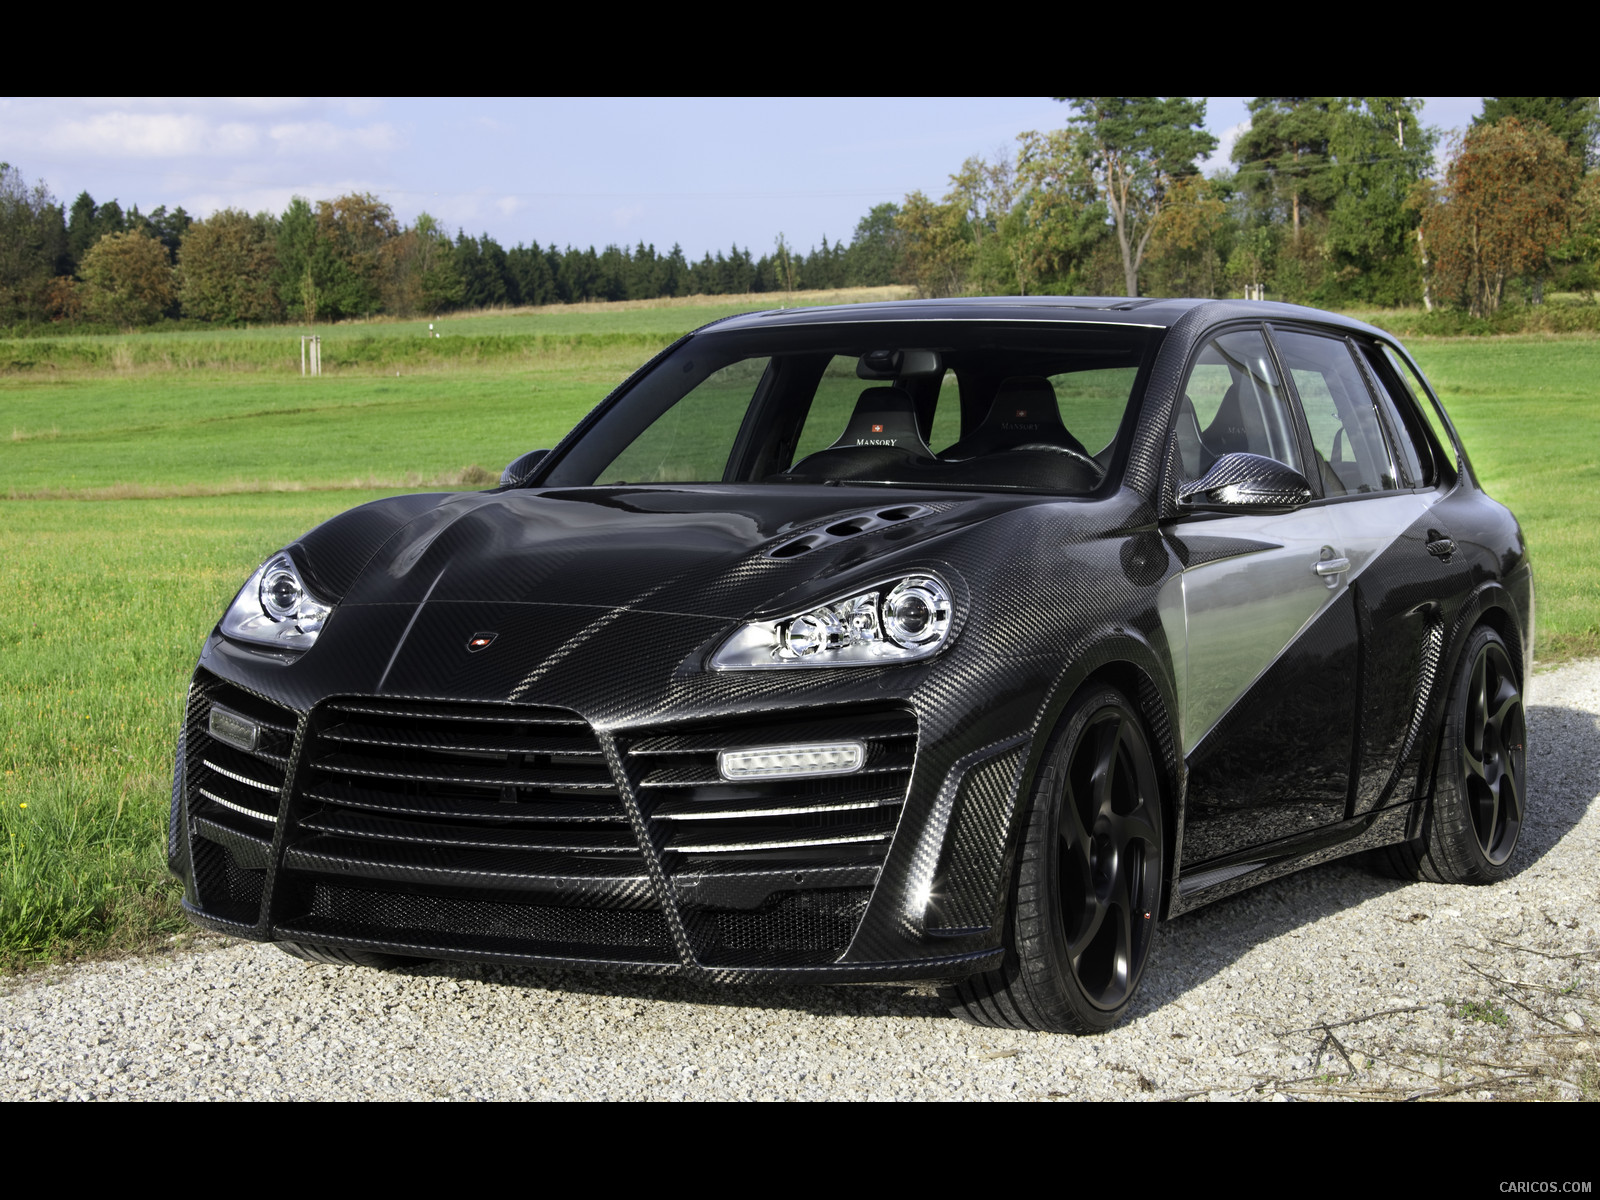 2009 Mansory Chopster based on Porsche Cayenne Turbo S  - Front, #7 of 38